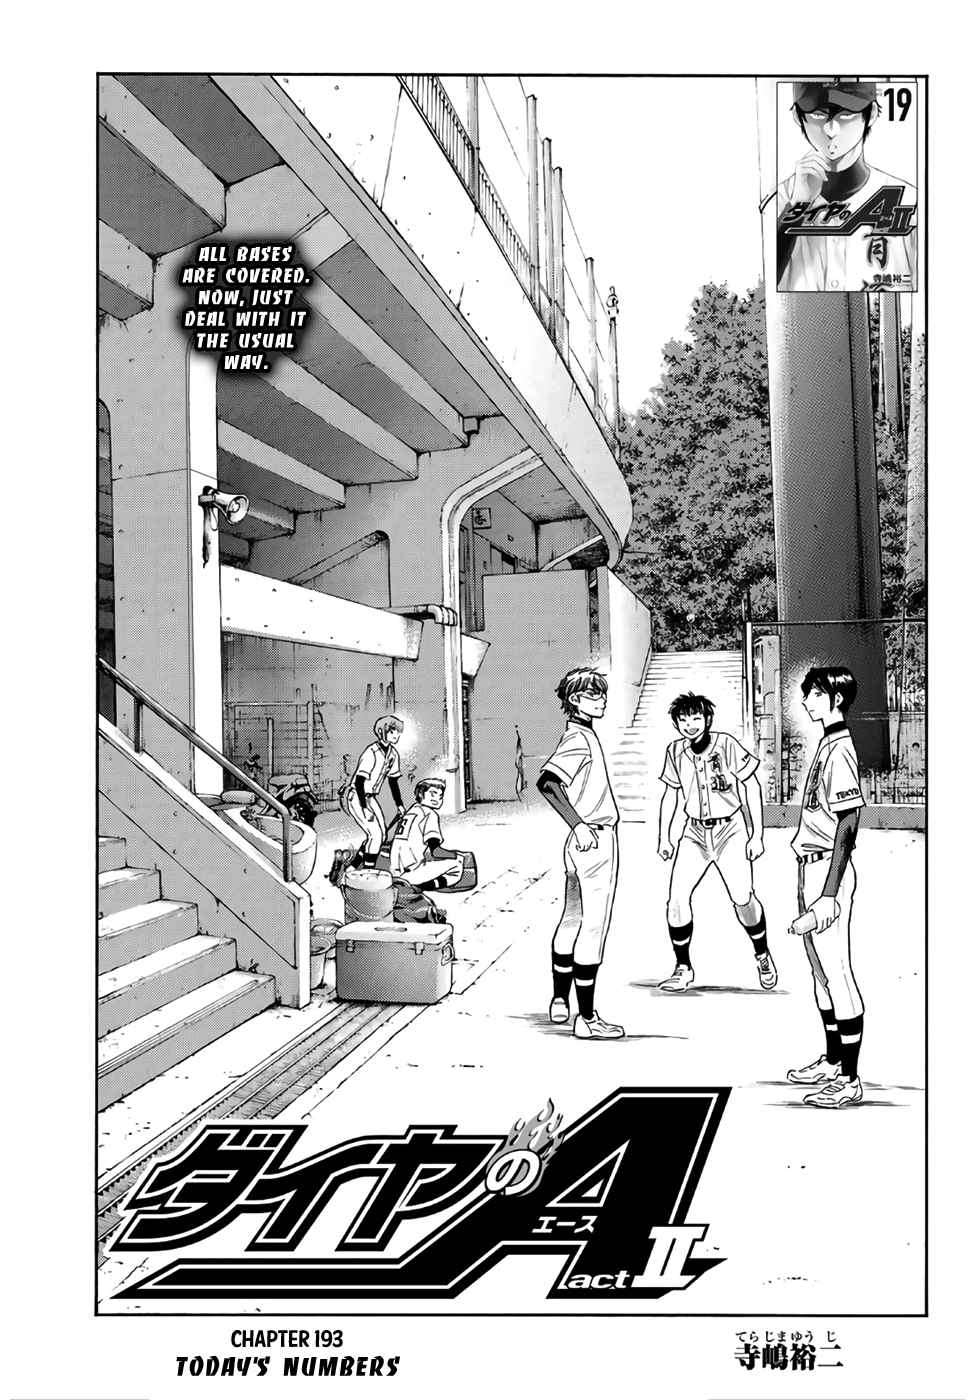 Diamond no Ace Act II Ch. 193 Today's Numbers